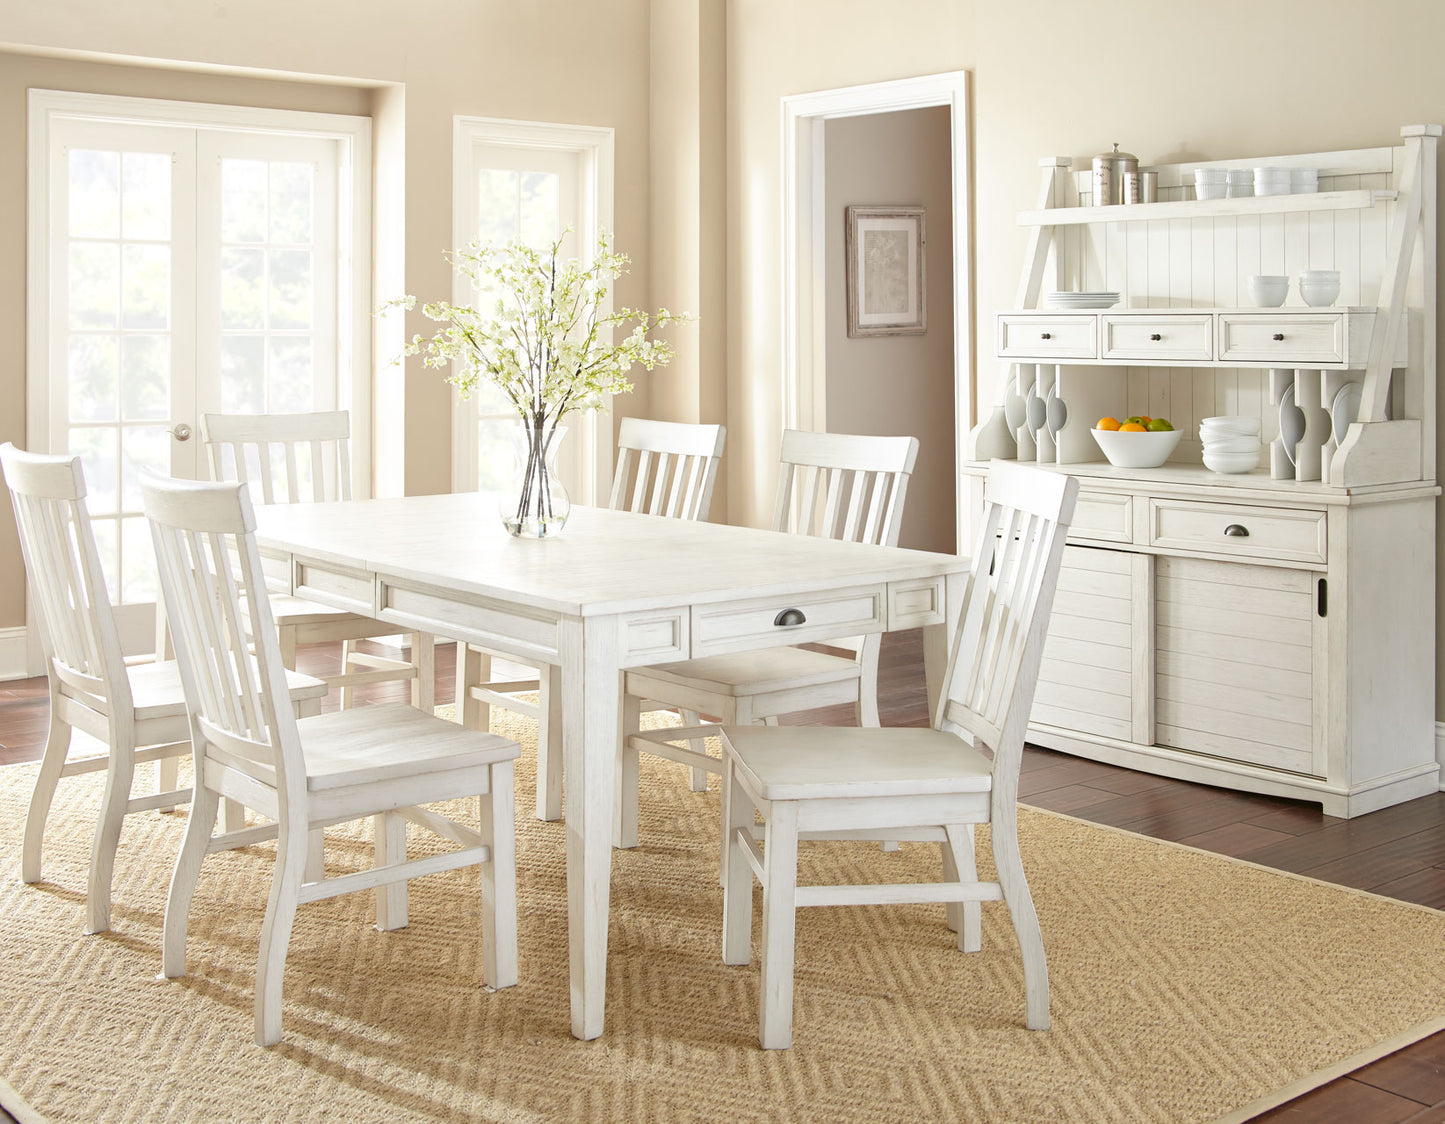 Cayla 7-Piece Dining Set
(Table & 6 Chairs)